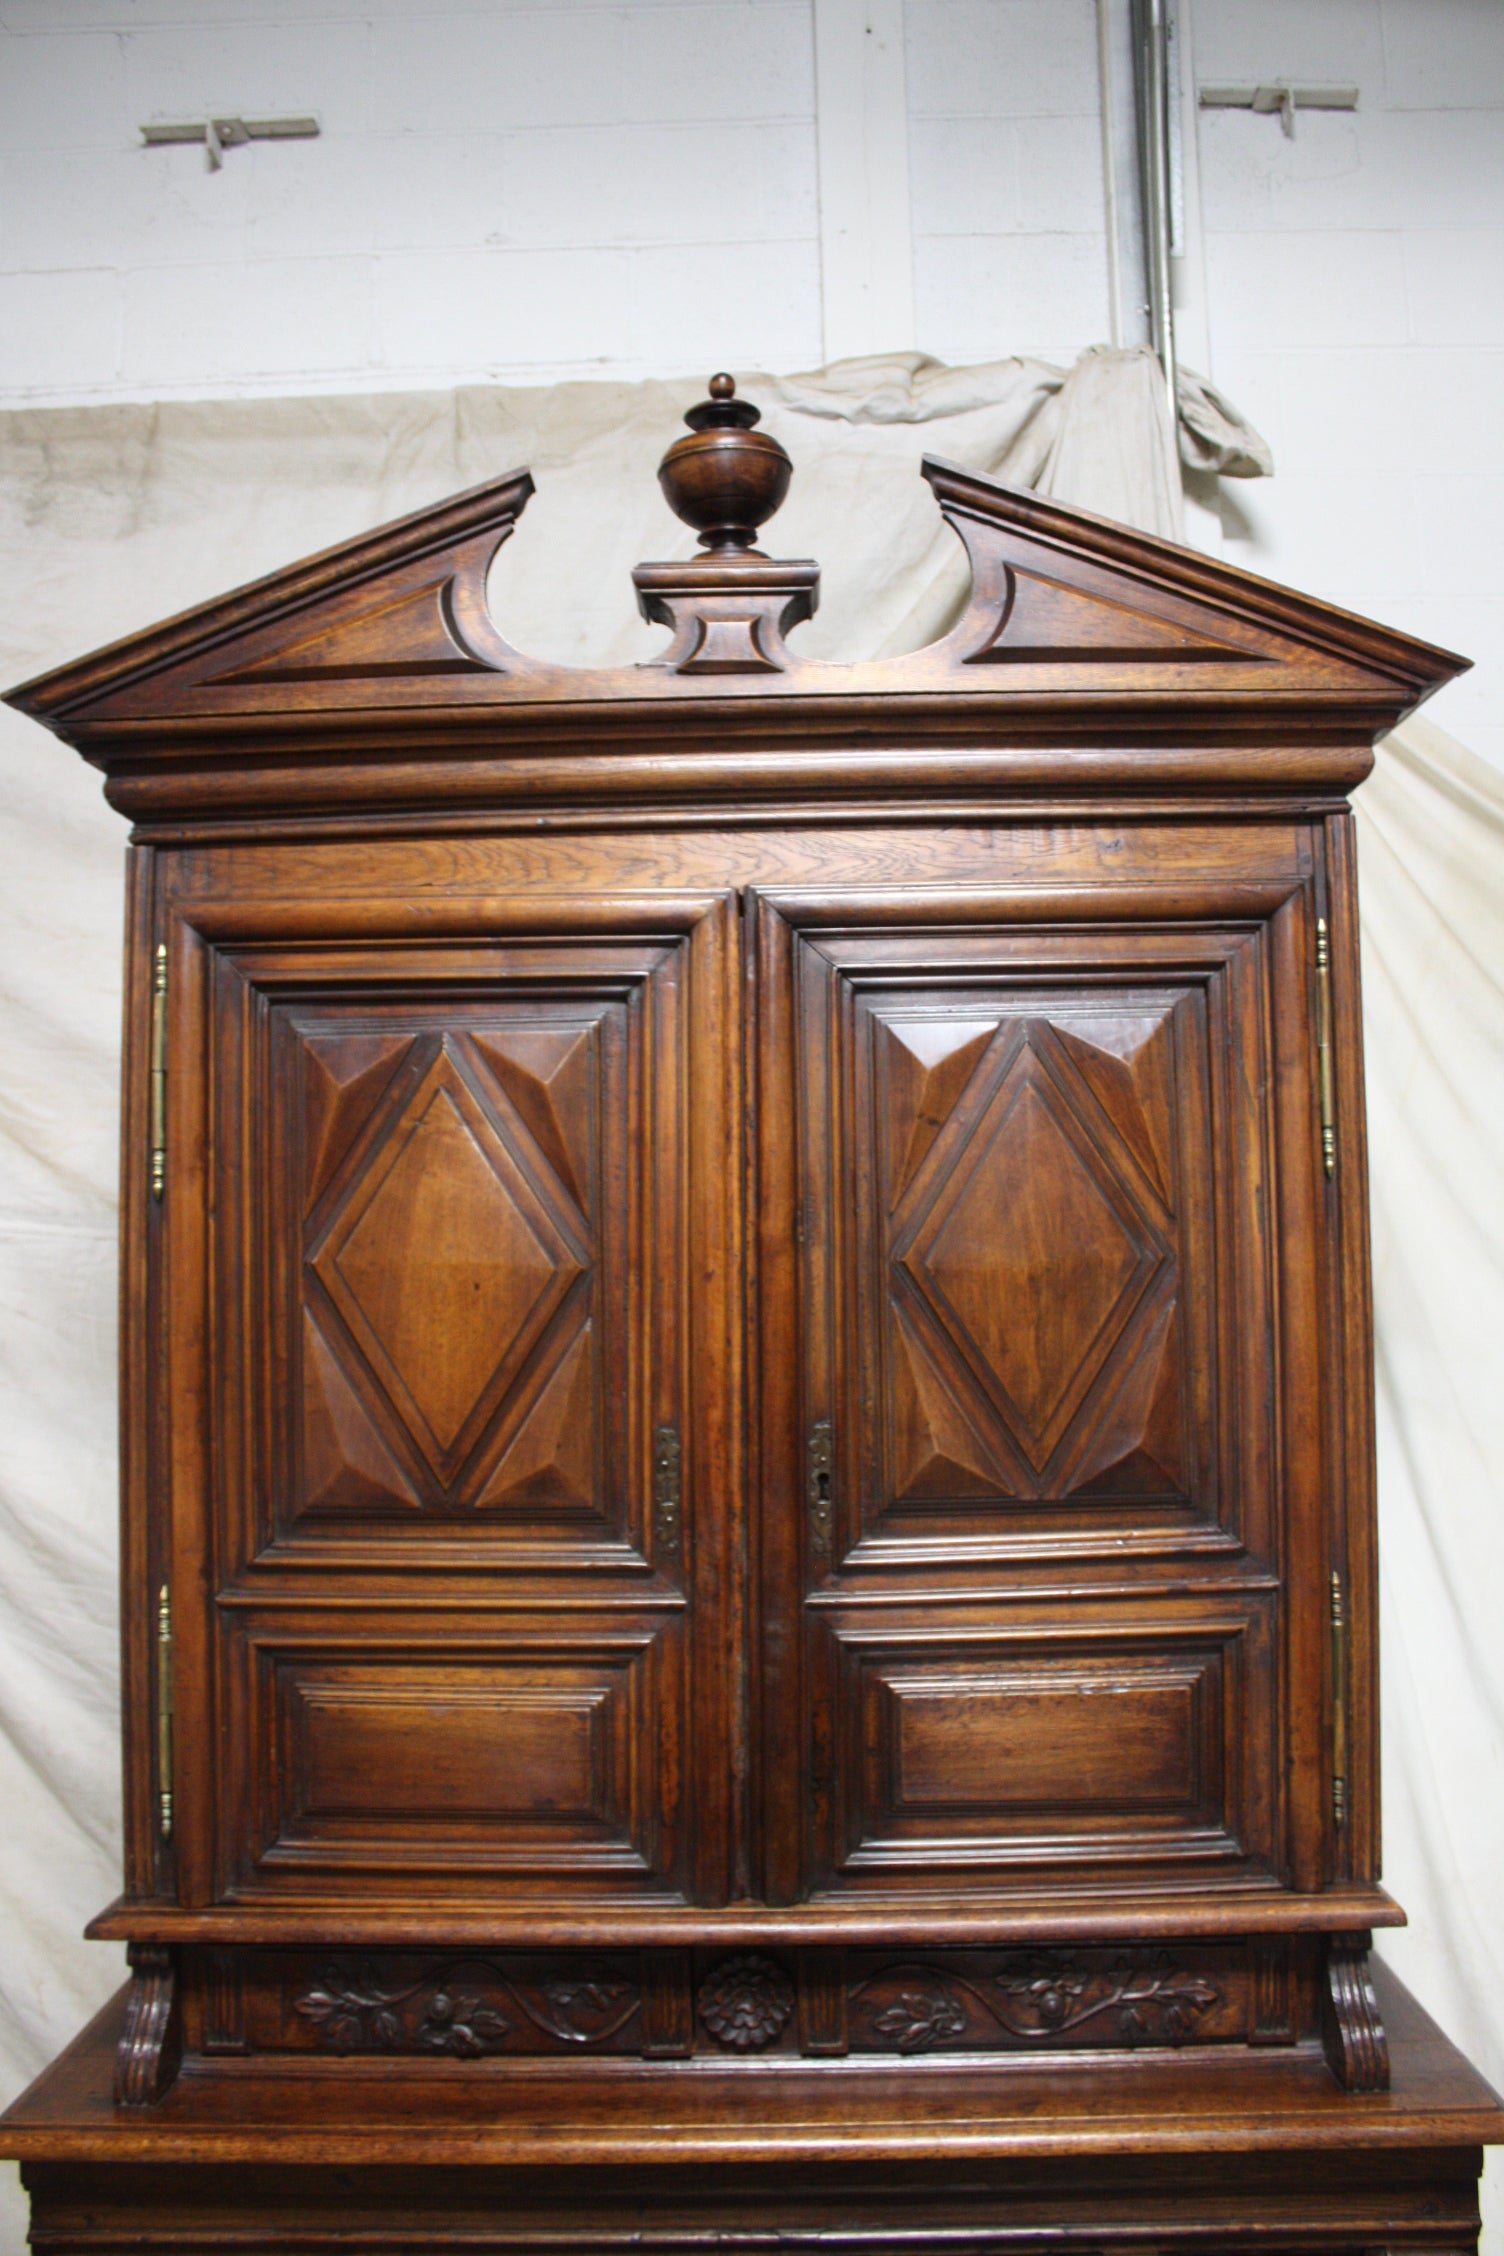 French 17th Century Cabinet In Good Condition For Sale In Stockbridge, GA